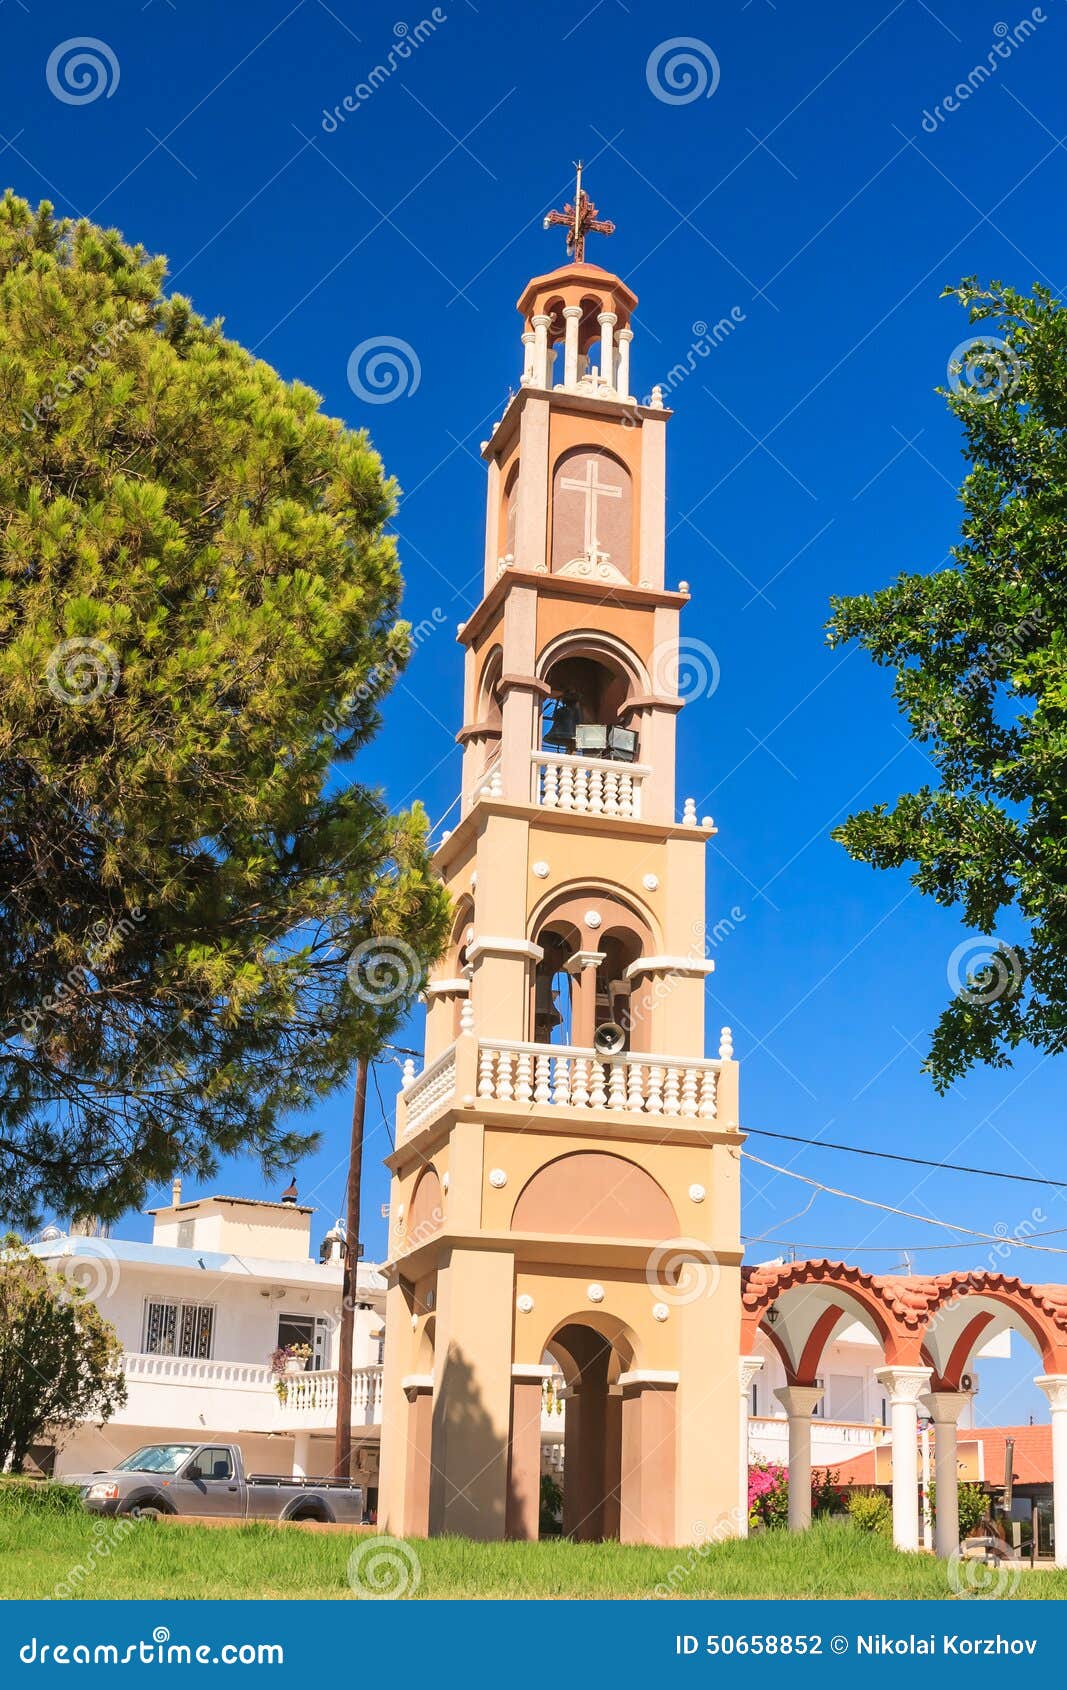 the bell tower of the church in the village of pilon (pylonas)